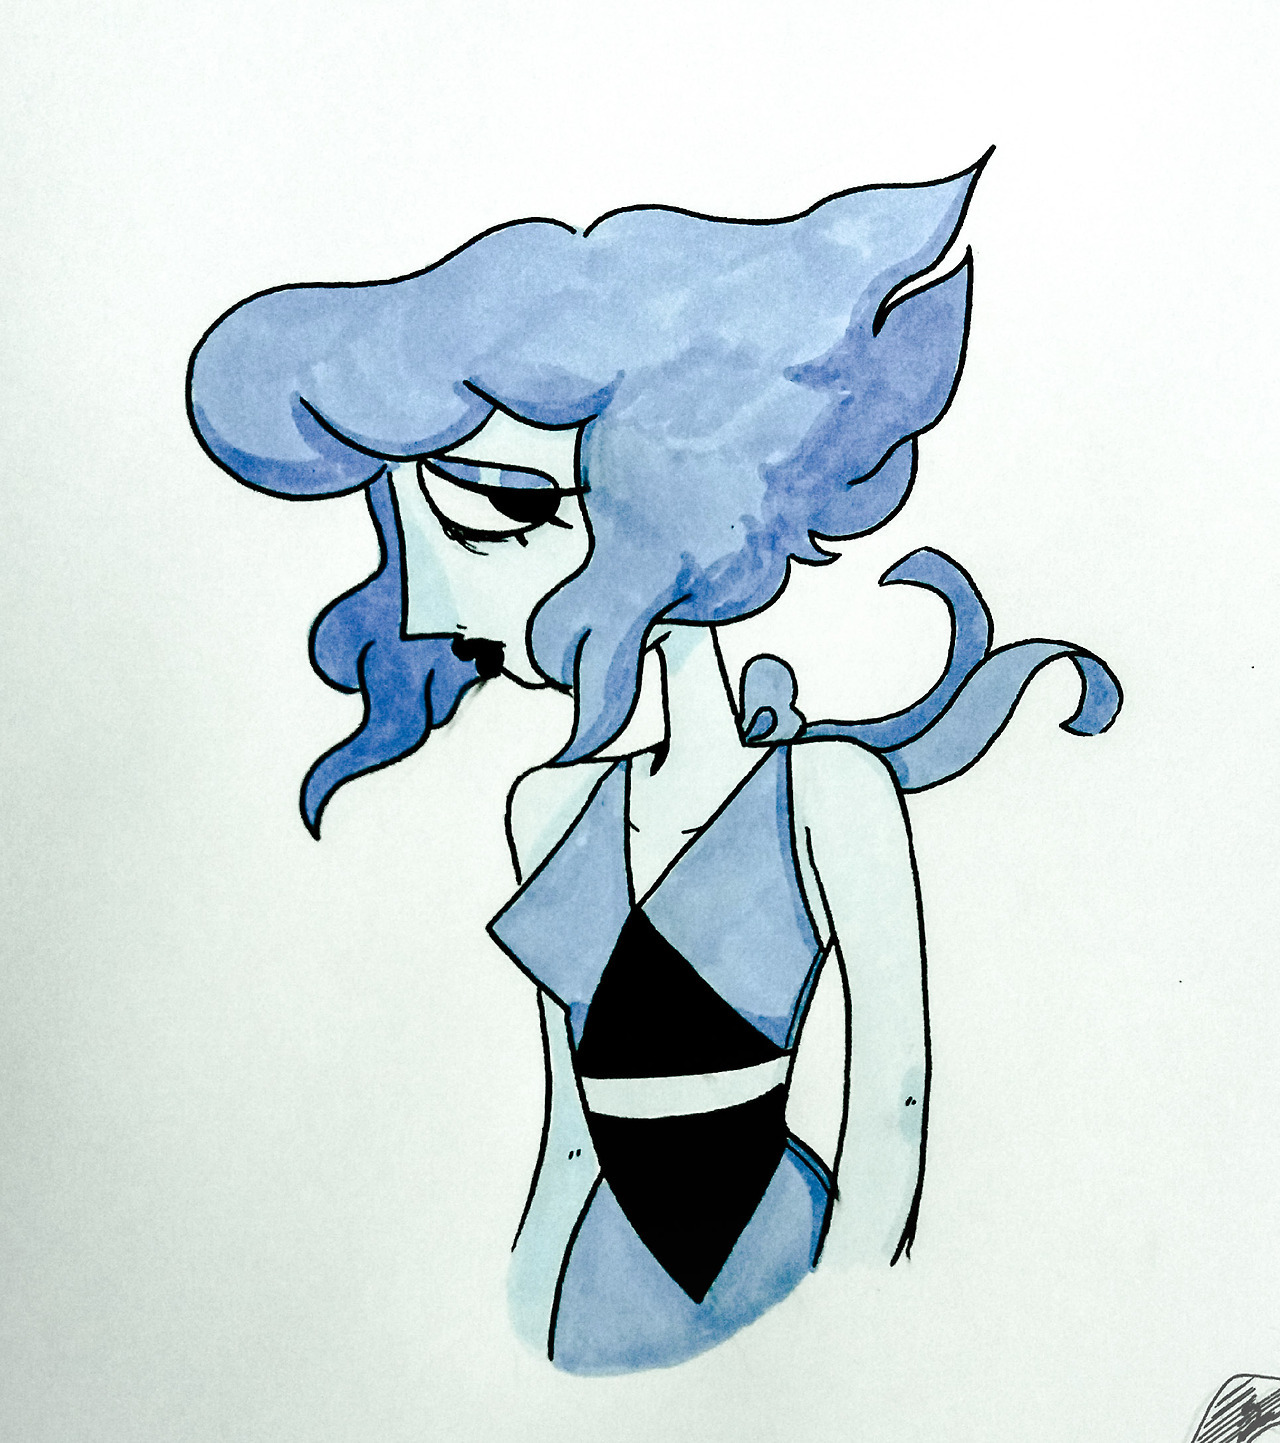 Testing out my new markers